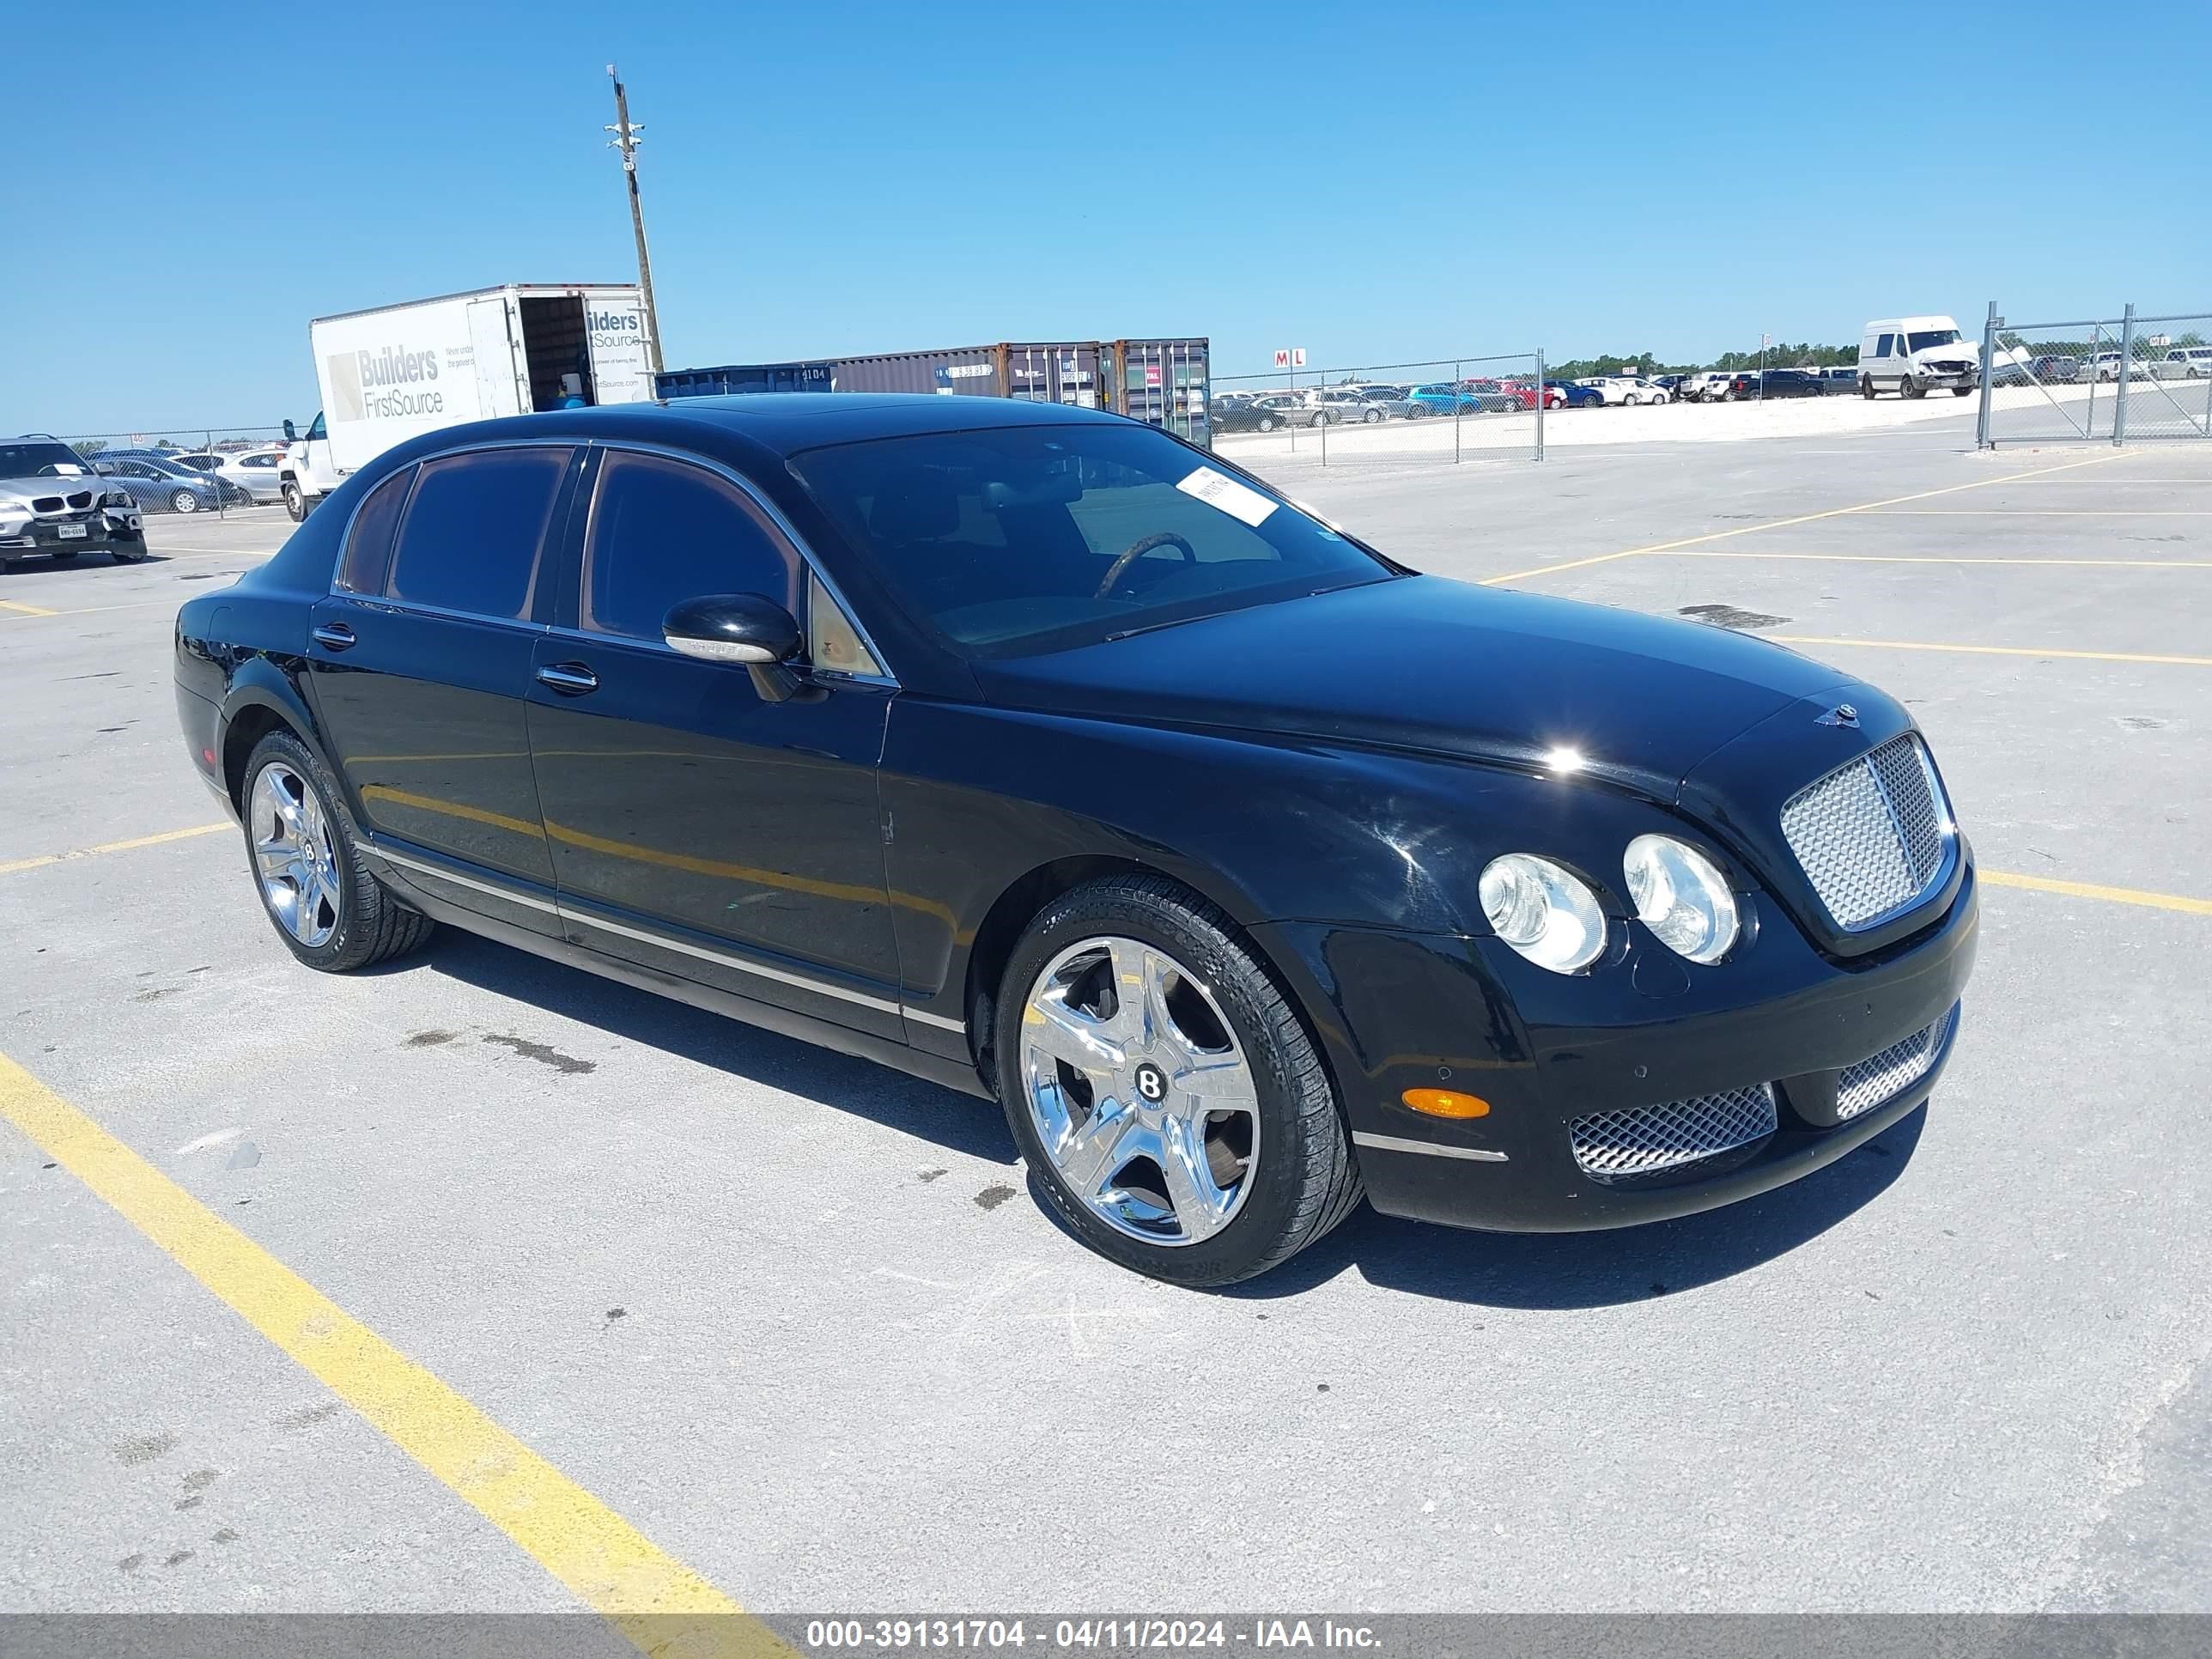 vin: SCBBR93W18C056738 SCBBR93W18C056738 2008 bentley continental flying spur 6000 for Sale in 76527, 23010 Firefly Rd, Bell County, Texas, USA